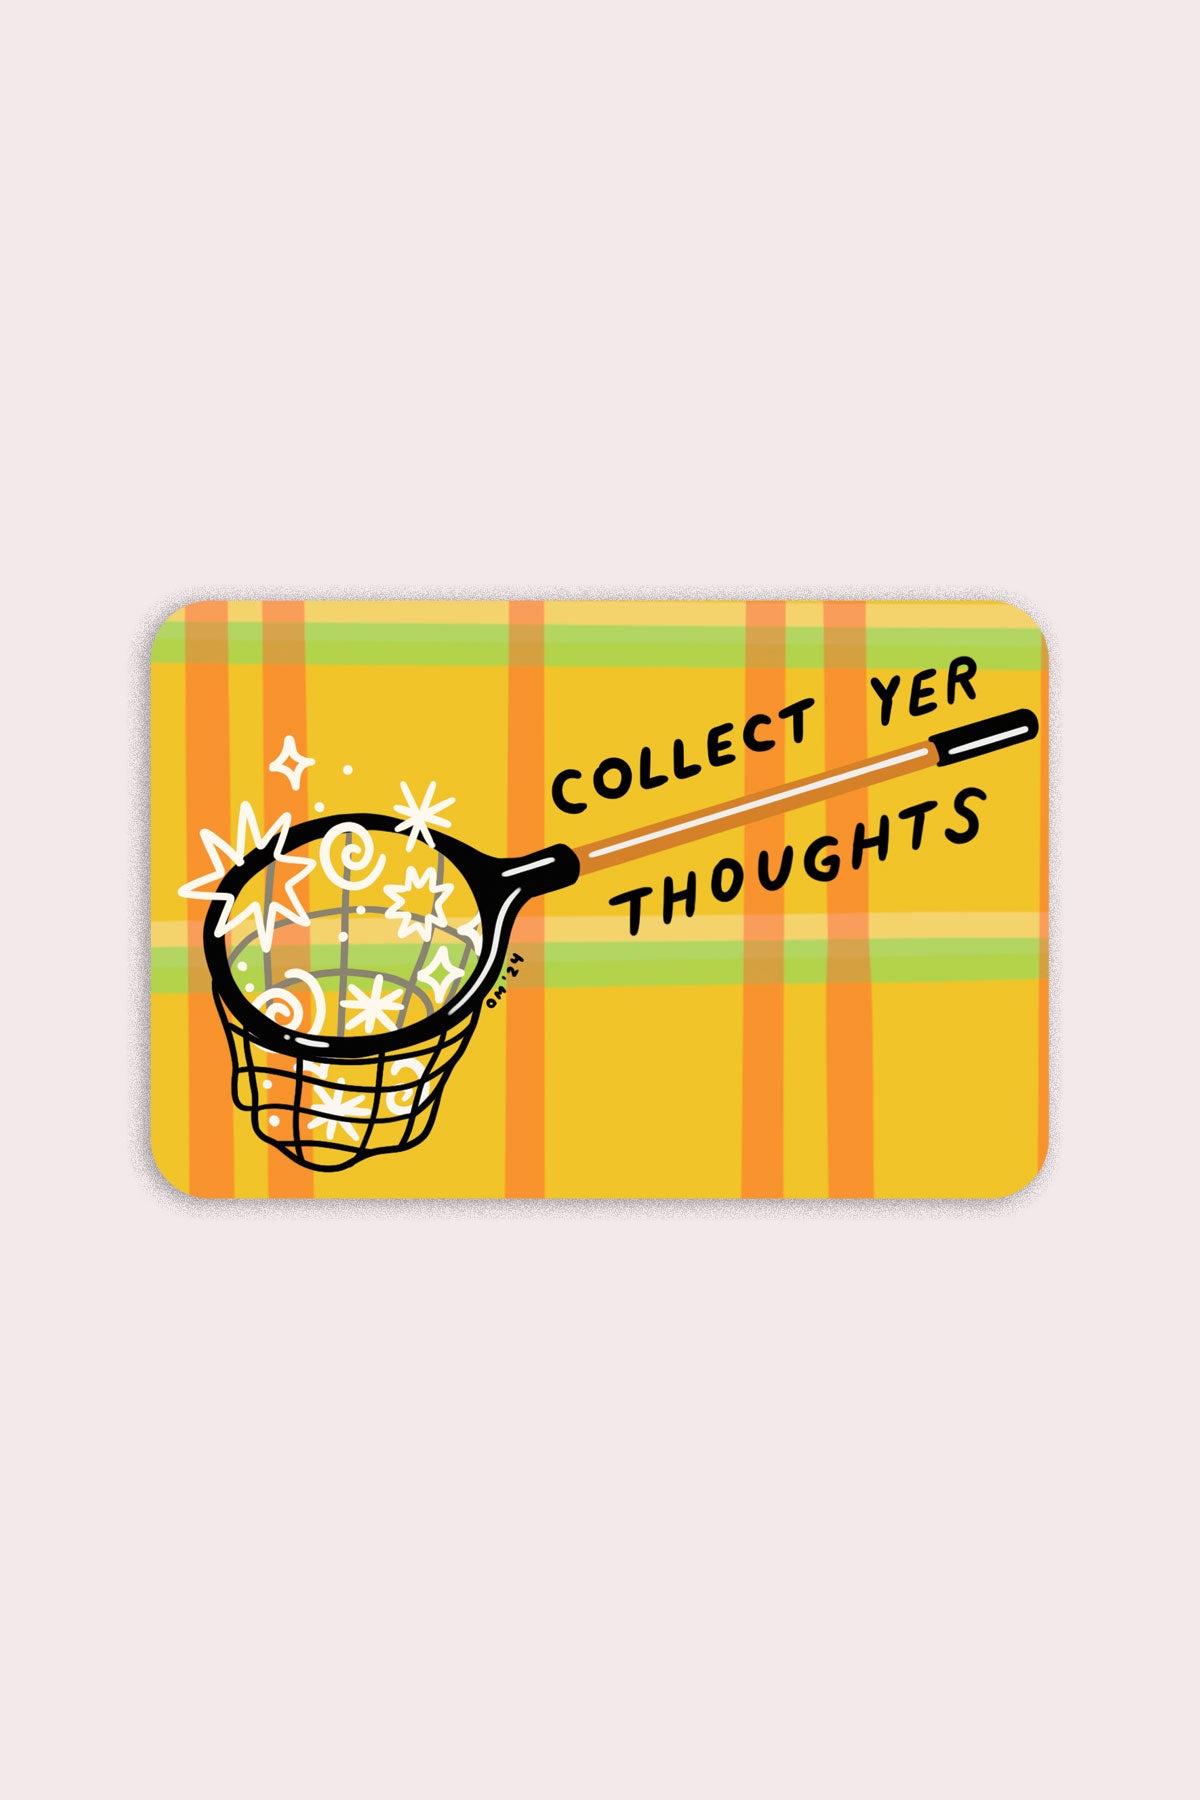 Collect Yer Thoughts Vinyl Sticker